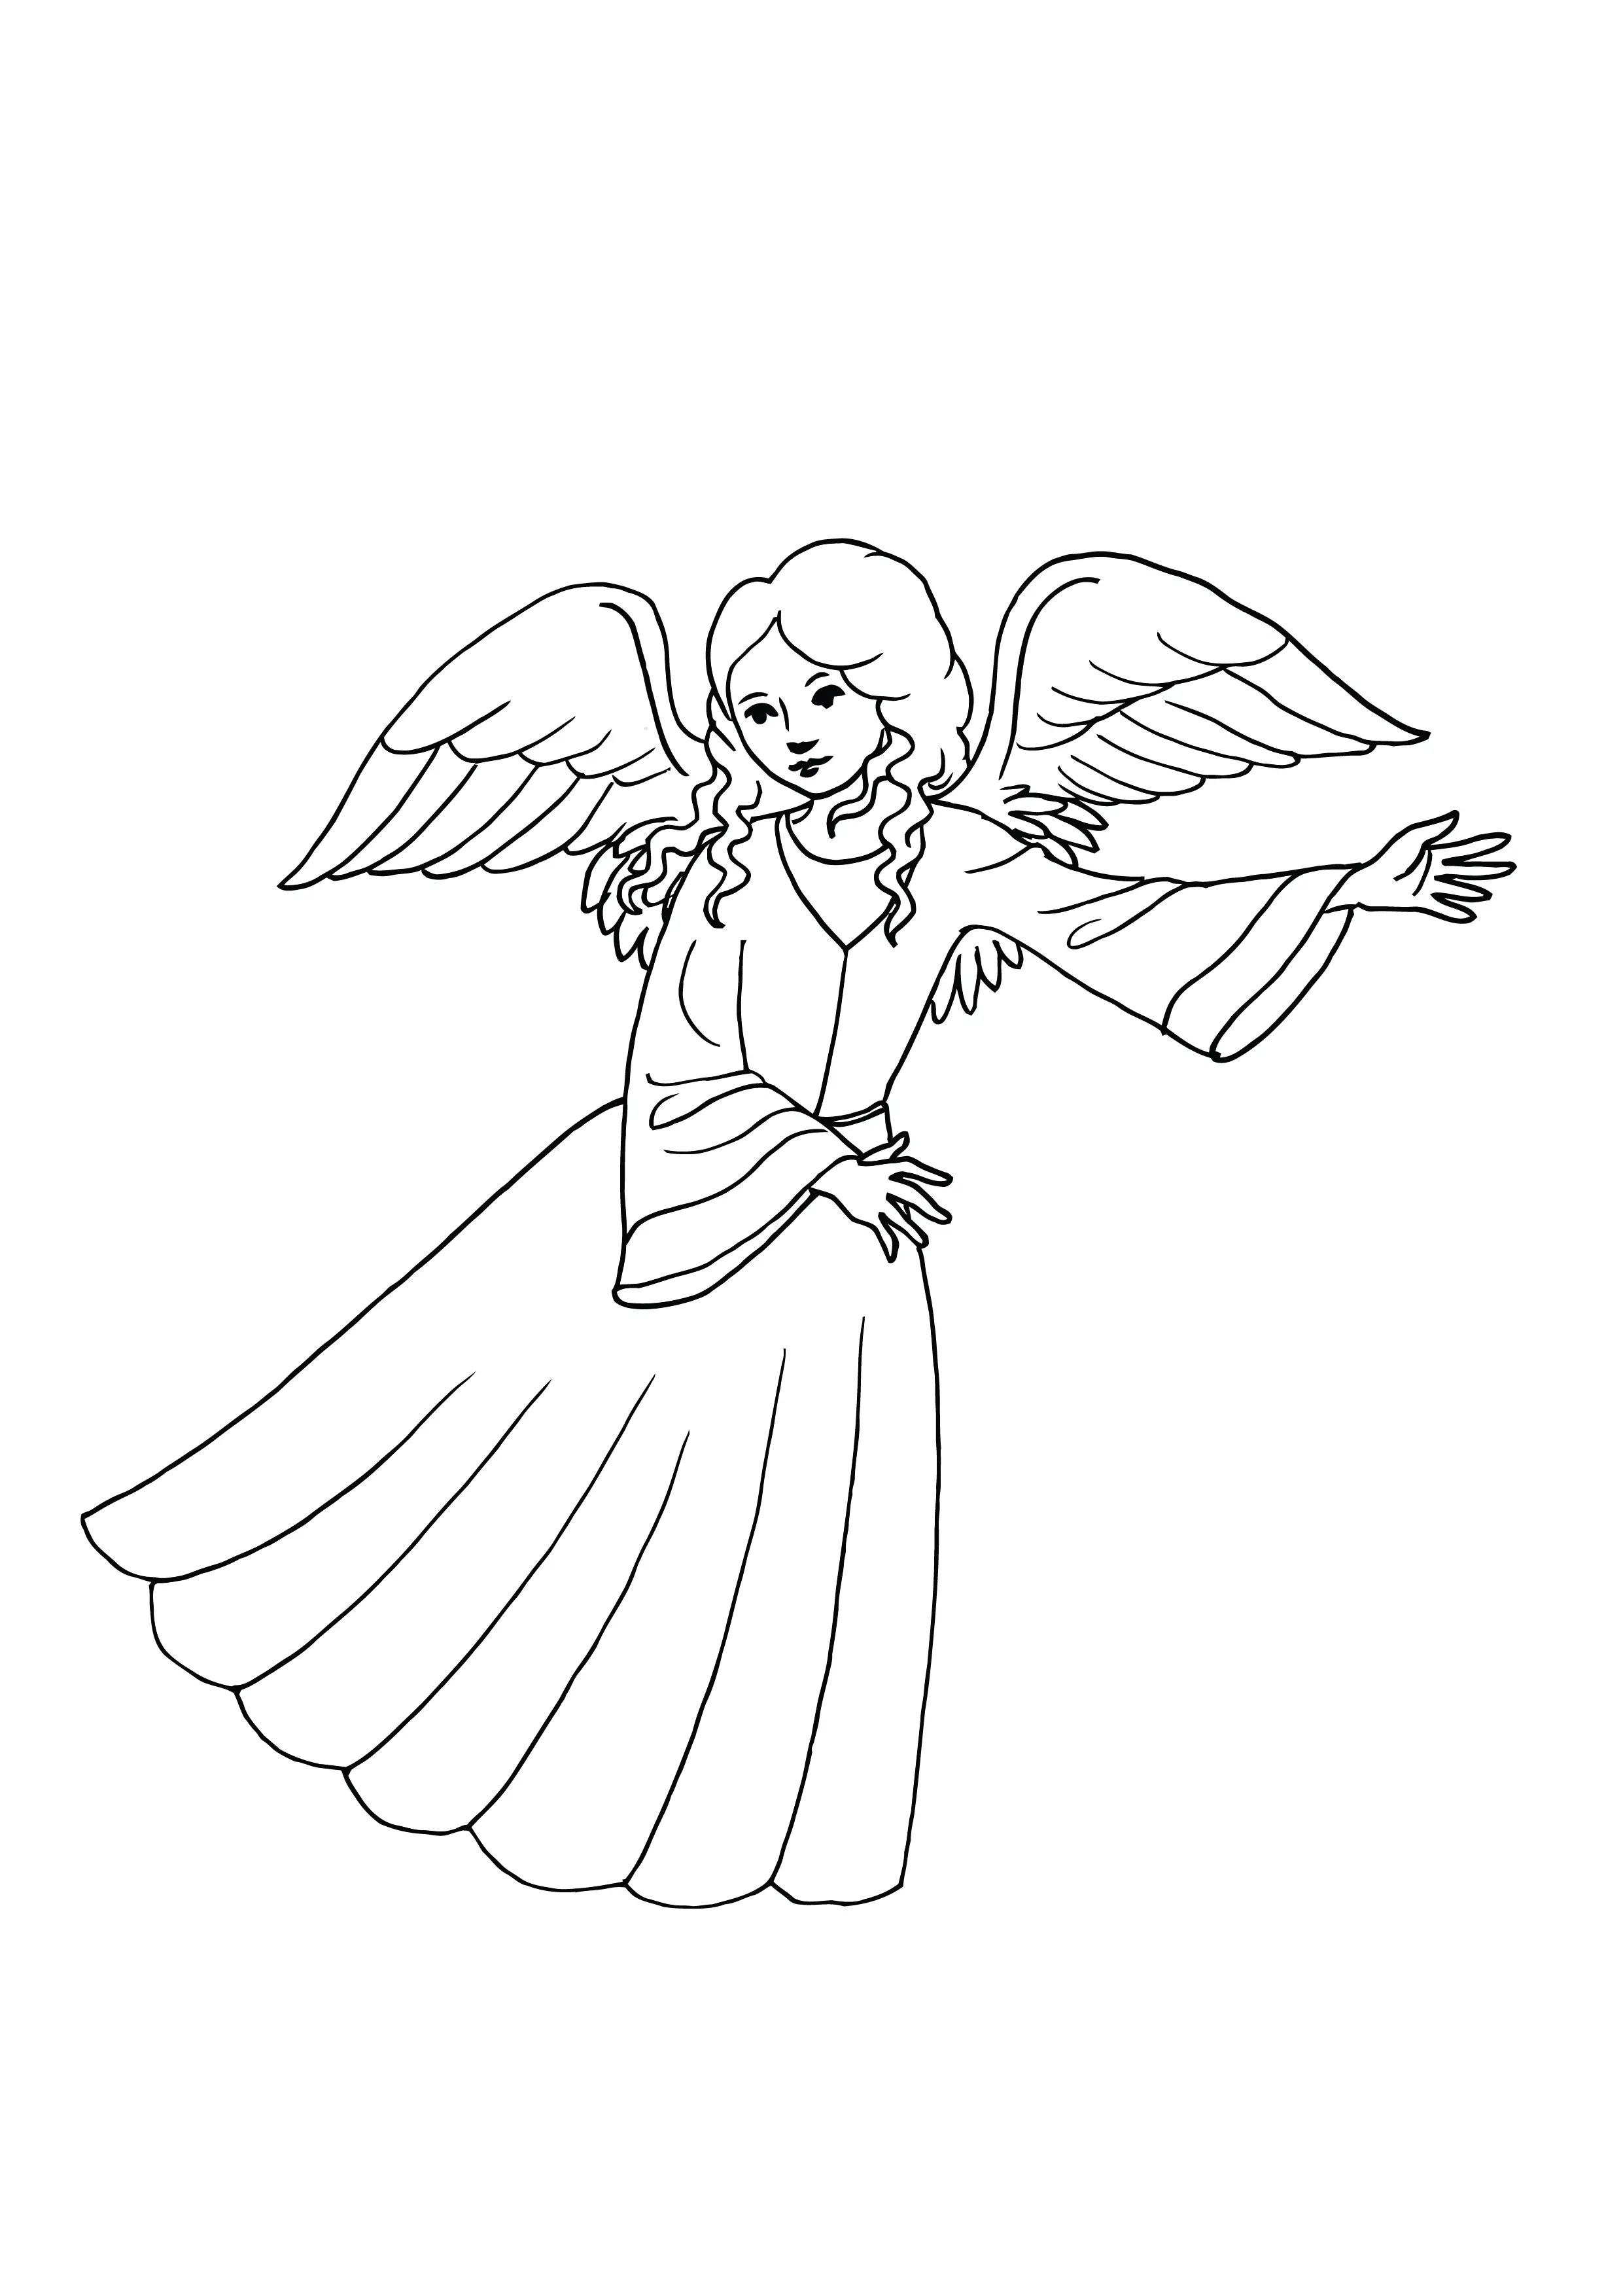 Christian Christmas Angel With Wings Friendly Free Clipart Coloring Pages for Kids Art Activities Line Art